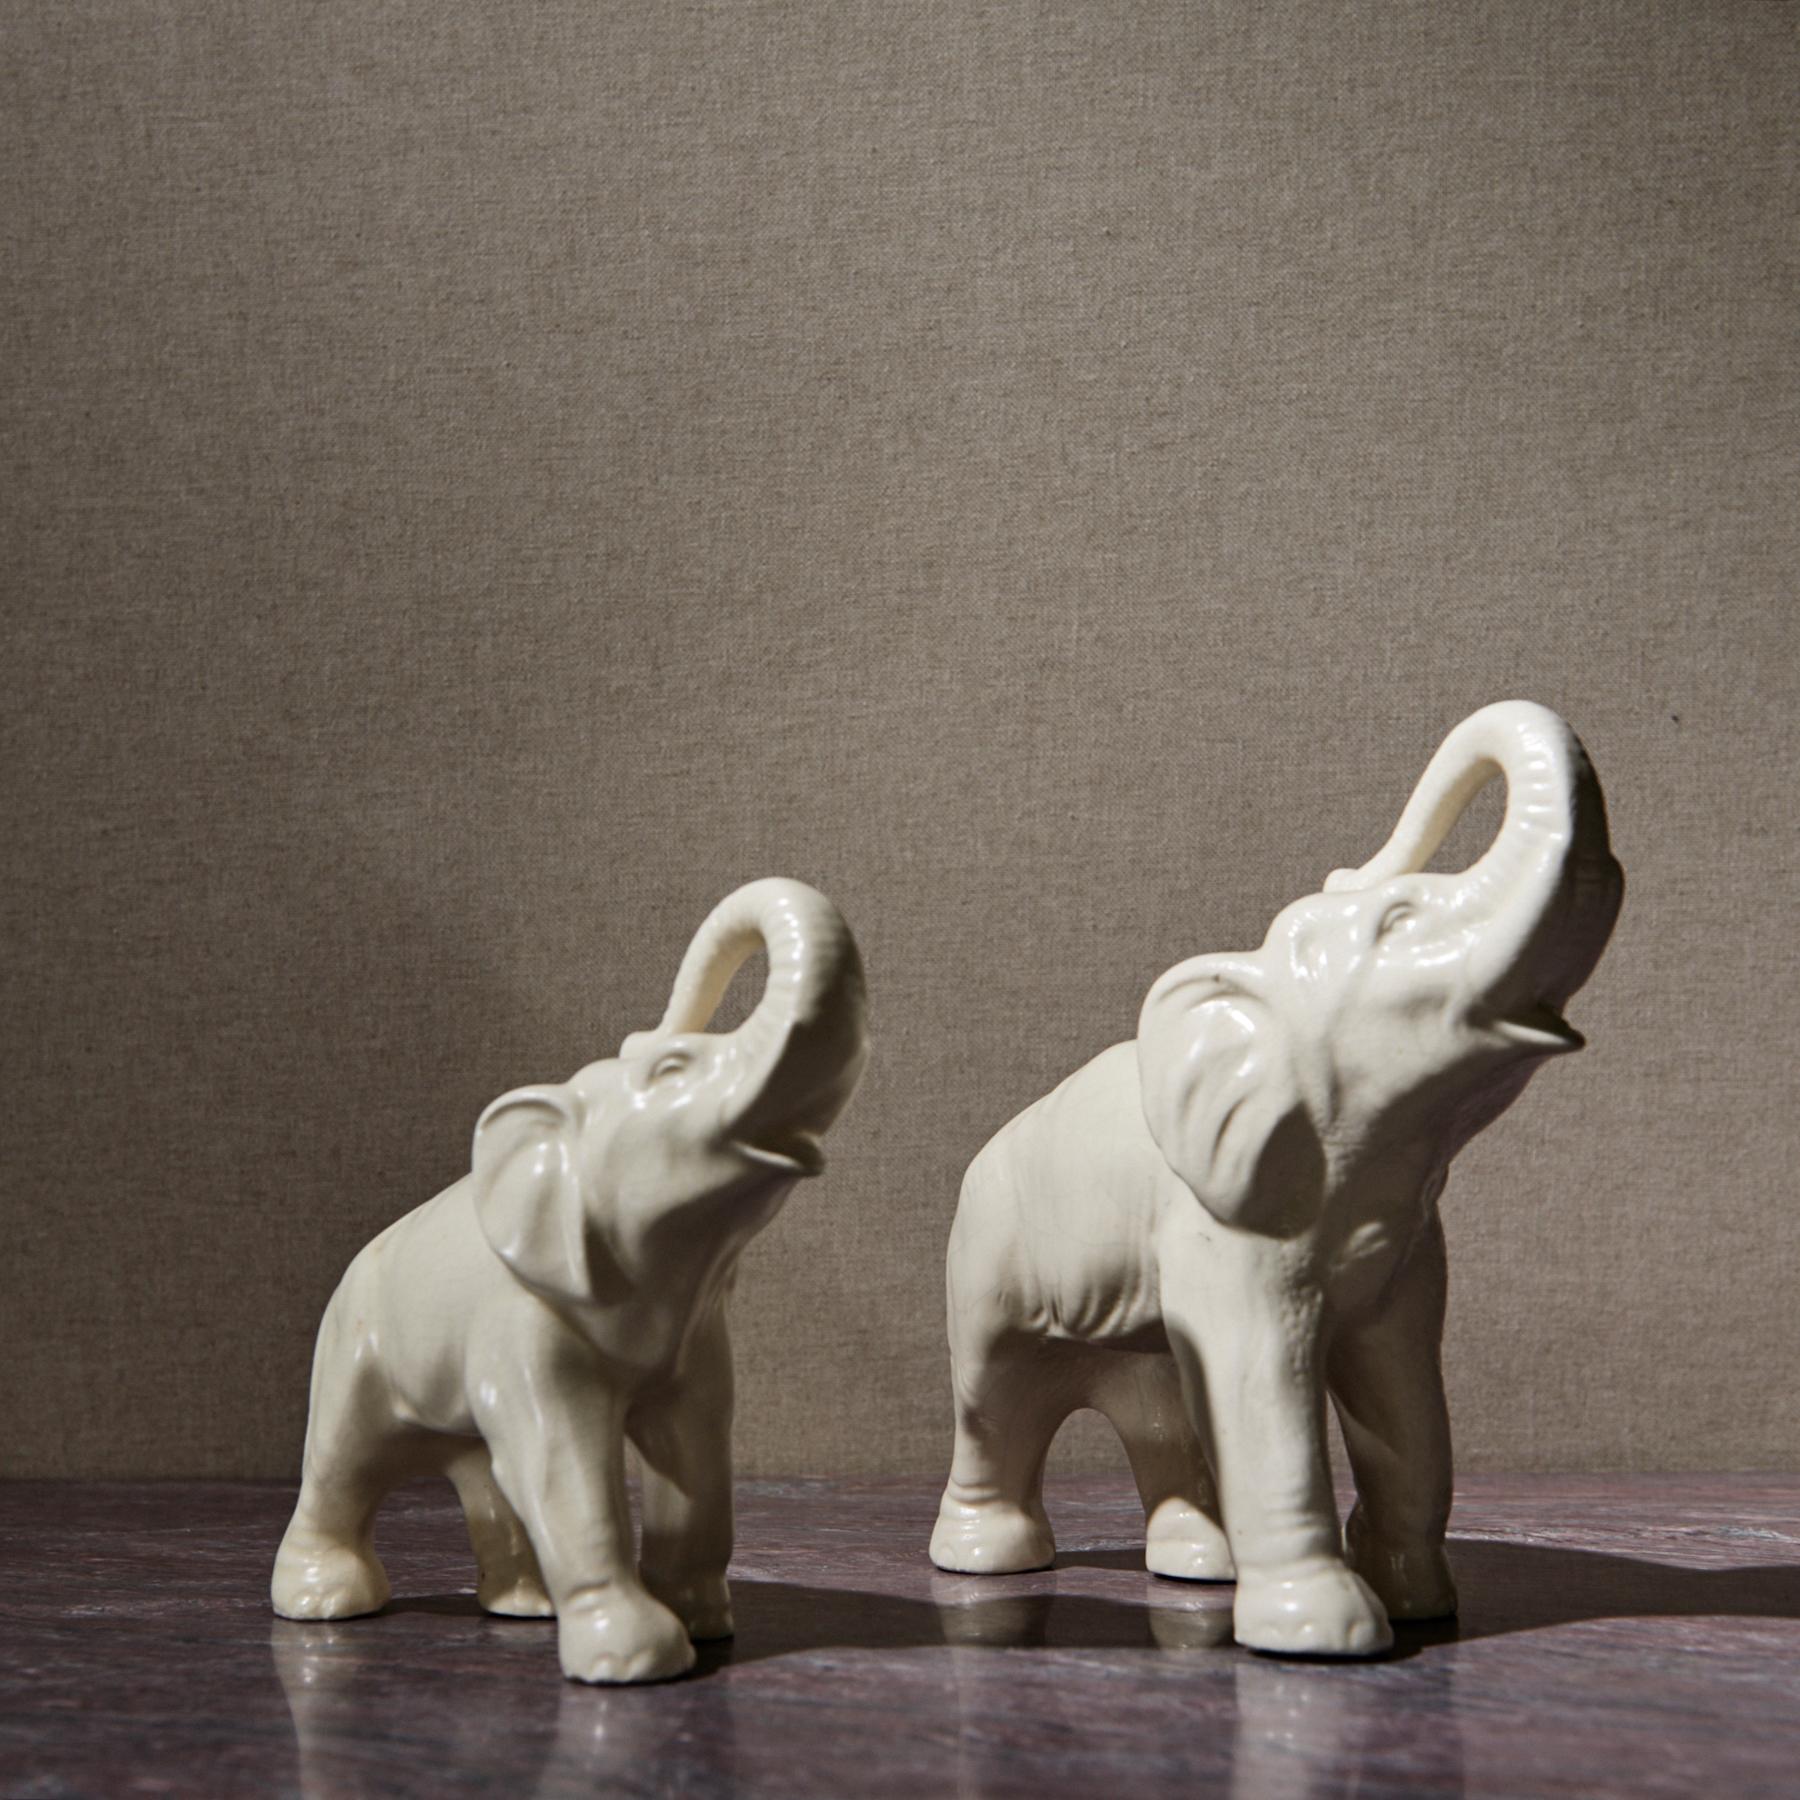 3 Ceramic Elephants by Anna-Lisa Thomson In Excellent Condition For Sale In Berlin, BE